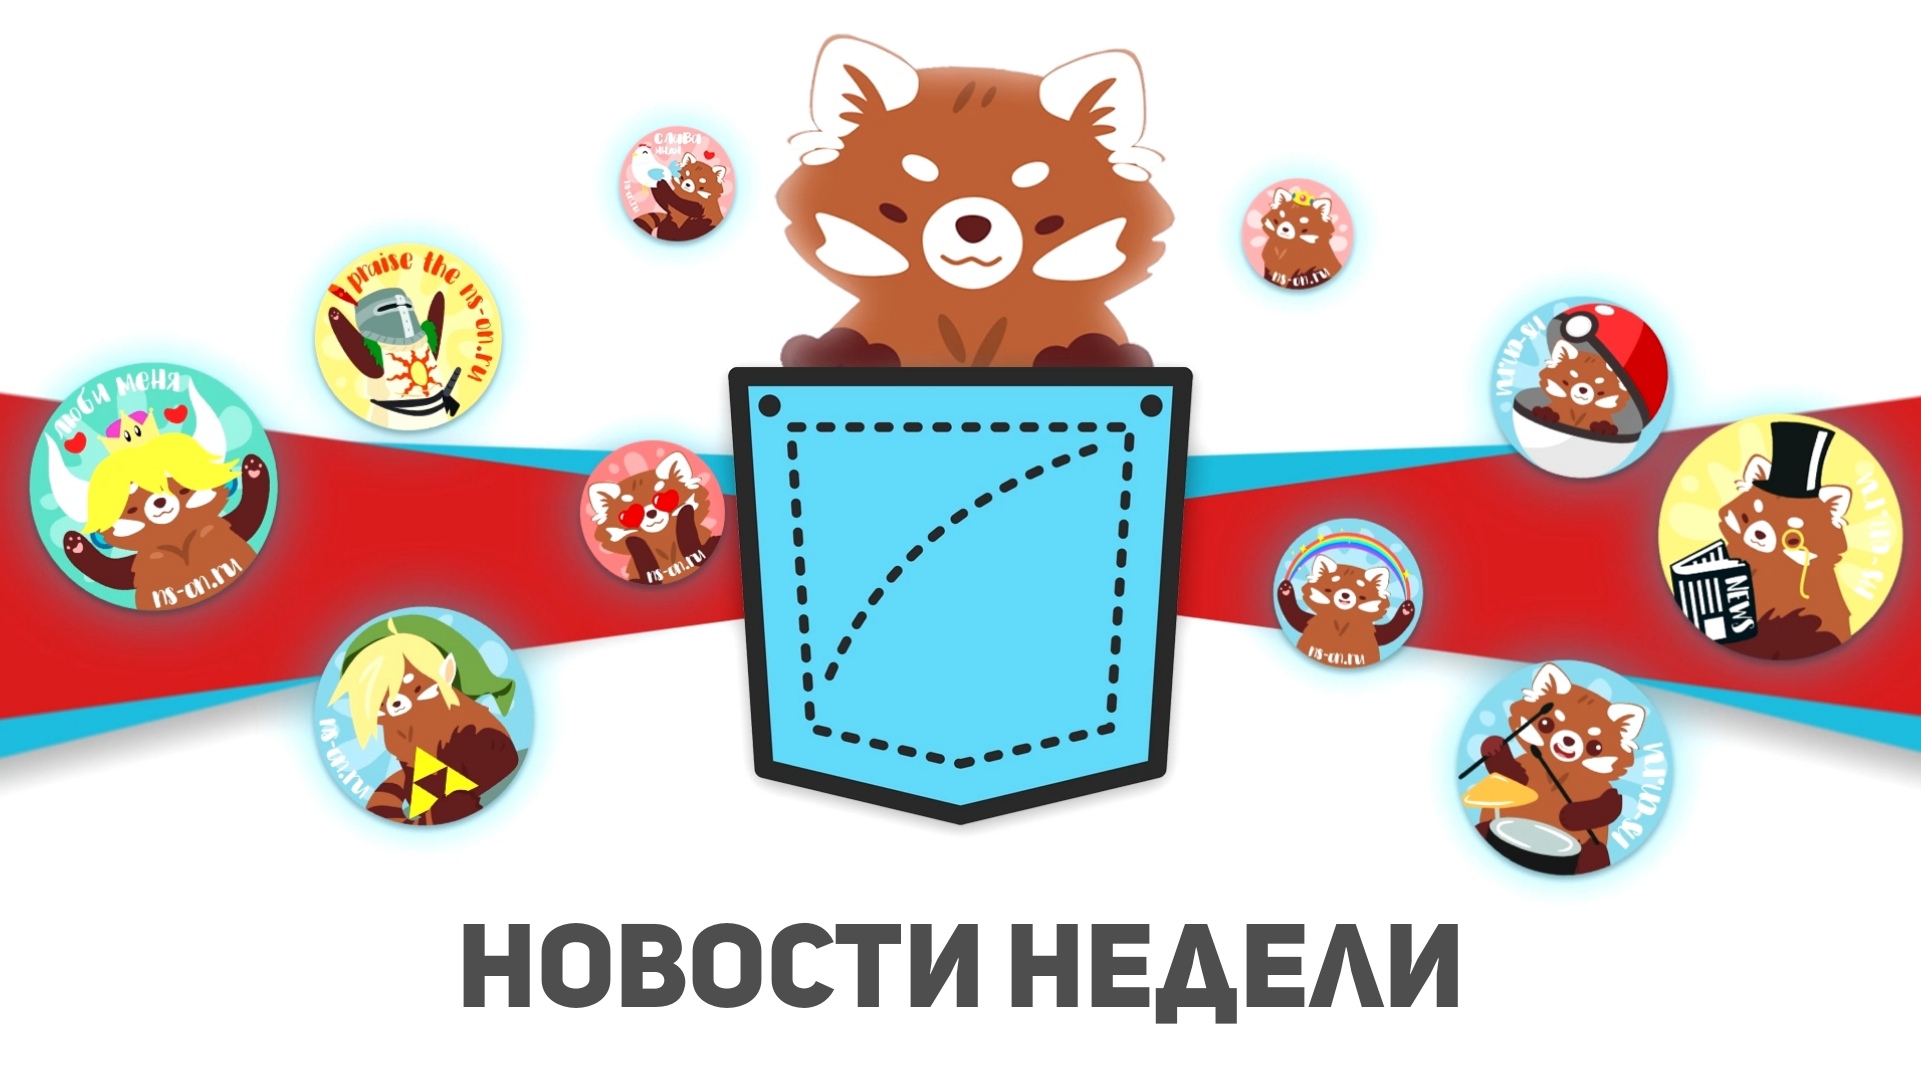 You are currently viewing Новости недели Nintendo Switch (03.05 – 09.05)